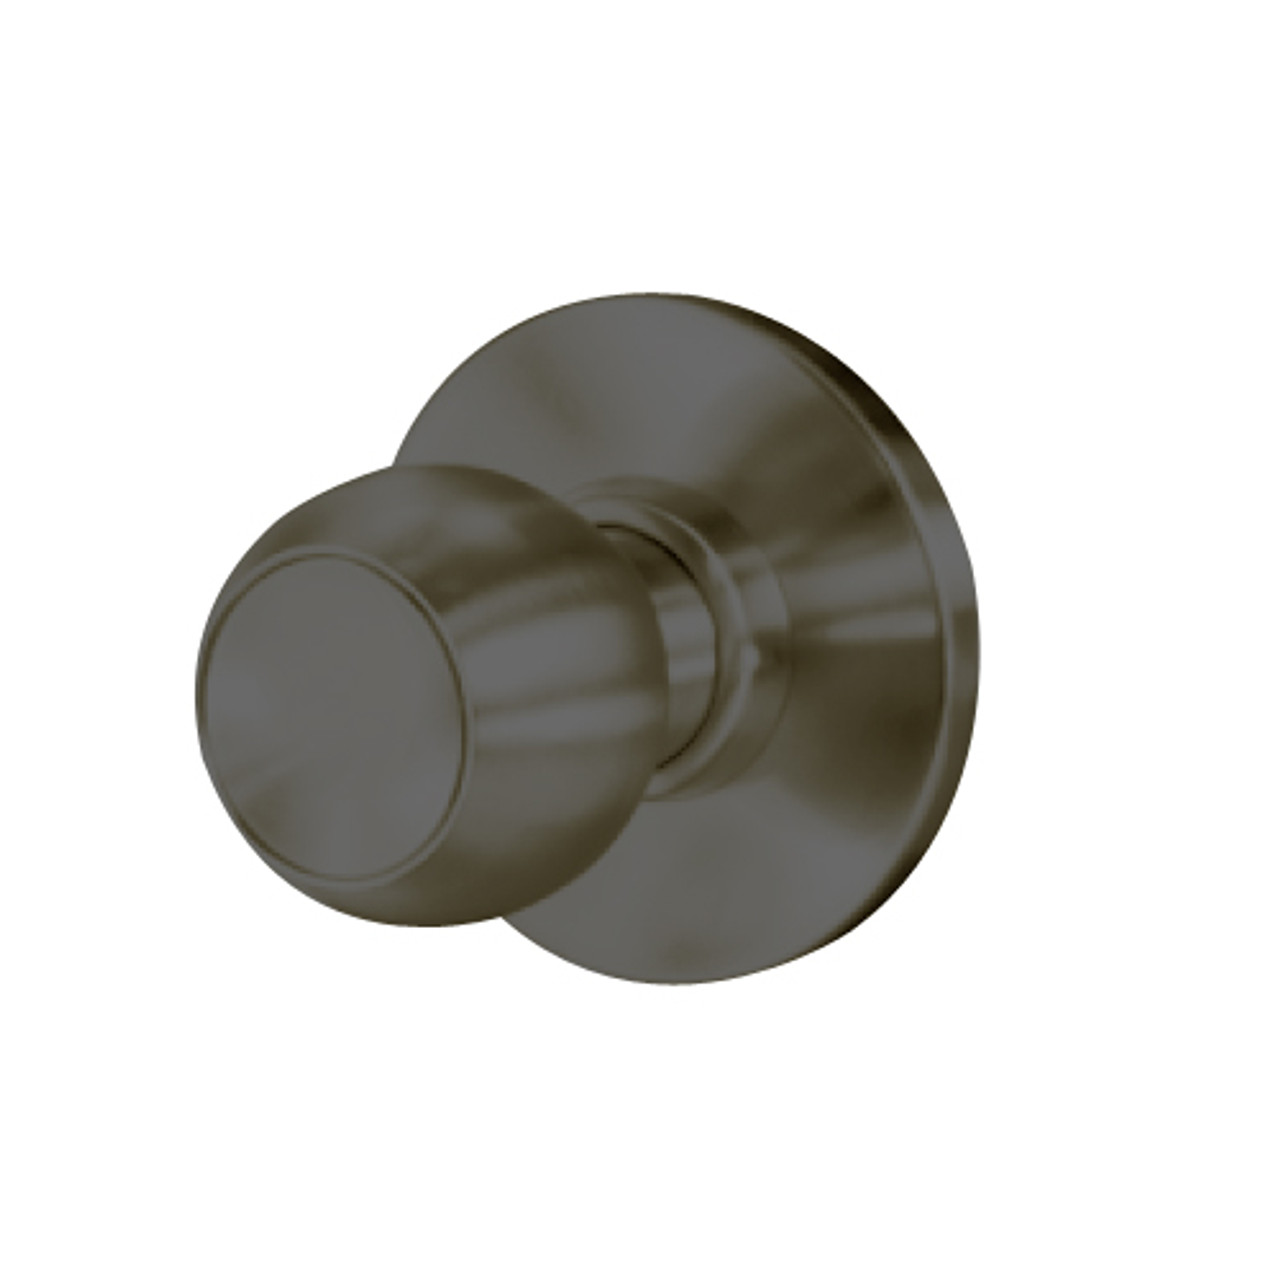 8K30M4AS3613 Best 8K Series Communicating Heavy Duty Cylindrical Knob Locks with Round Style in Oil Rubbed Bronze